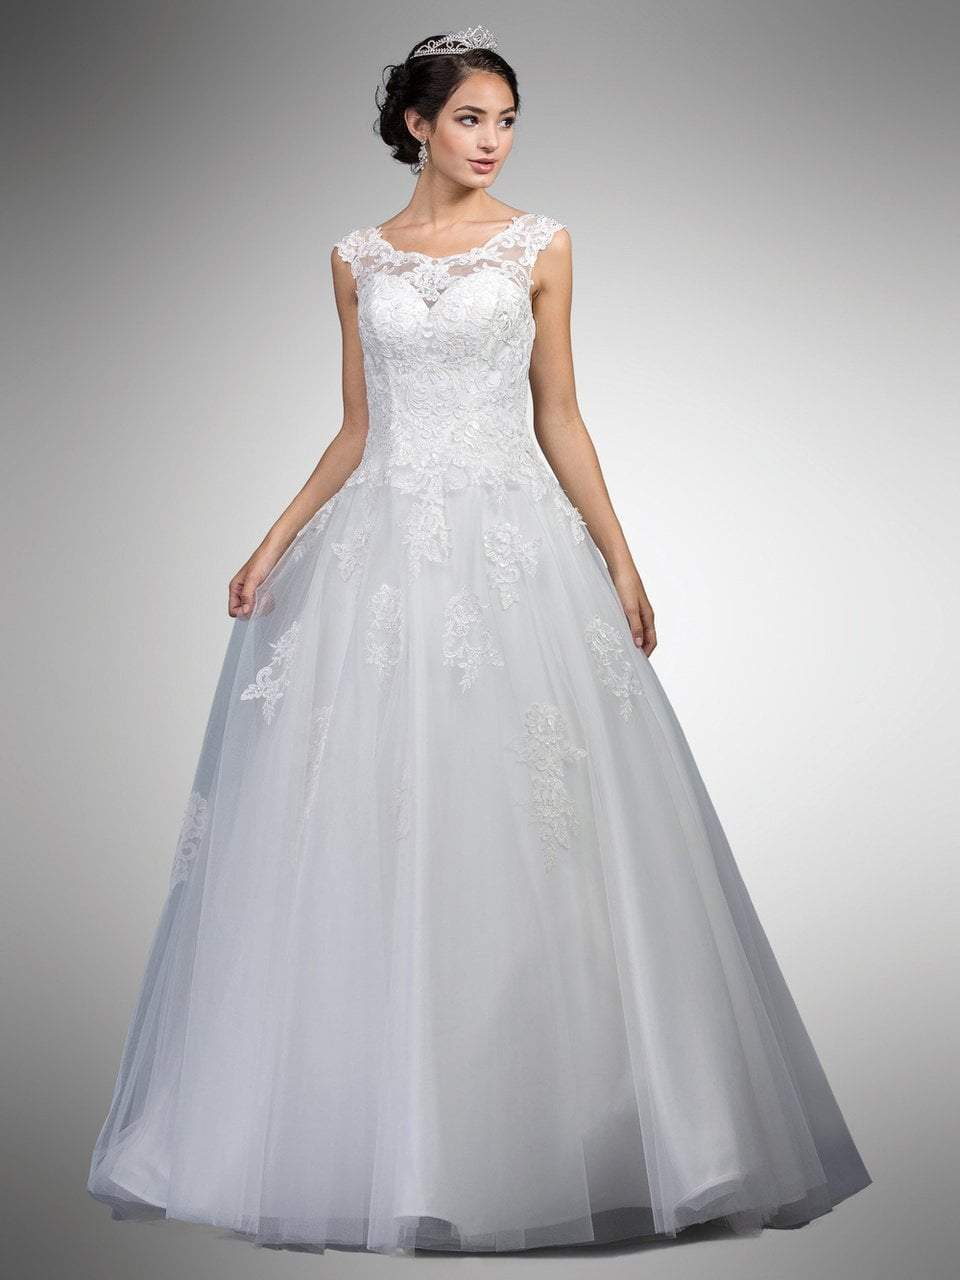 Dancing Queen Bridal - A7002 Embellished Lace Illusion Bateau Ballgown Bridal Dresses XS / Off White